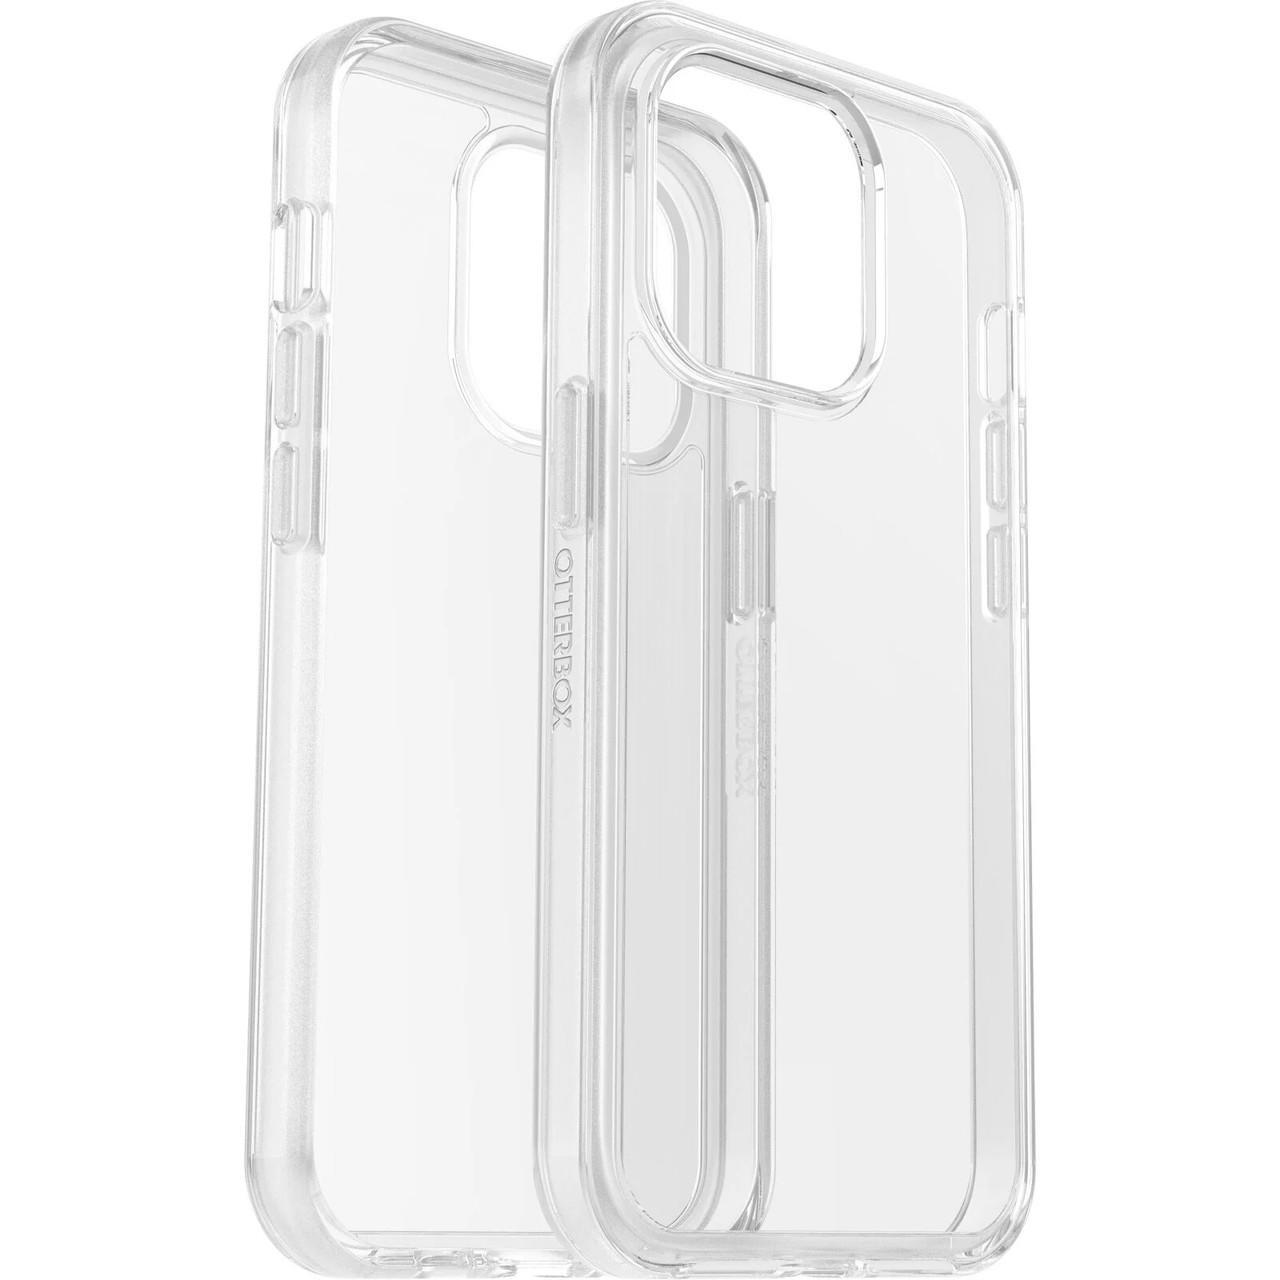 OTTERBOX Apple iPhone 14 Pro Symmetry Series Clear Antimicrobial Case - Clear (77-88620), 3X Military Standard Drop Protection, Slim design